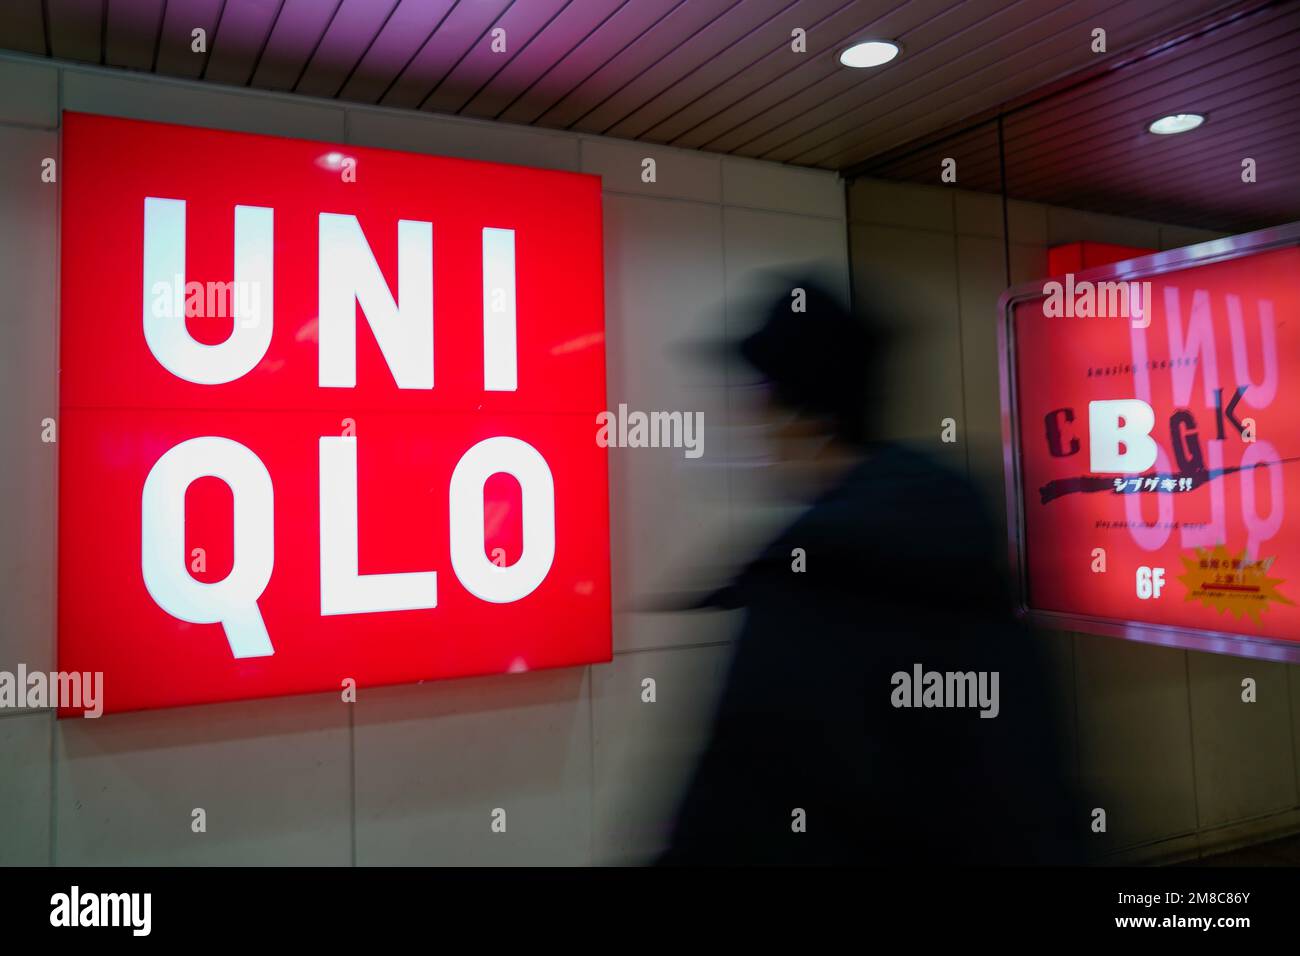 Uniqlo Logo Images Browse 1163 Stock Photos  Vectors Free Download with  Trial  Shutterstock